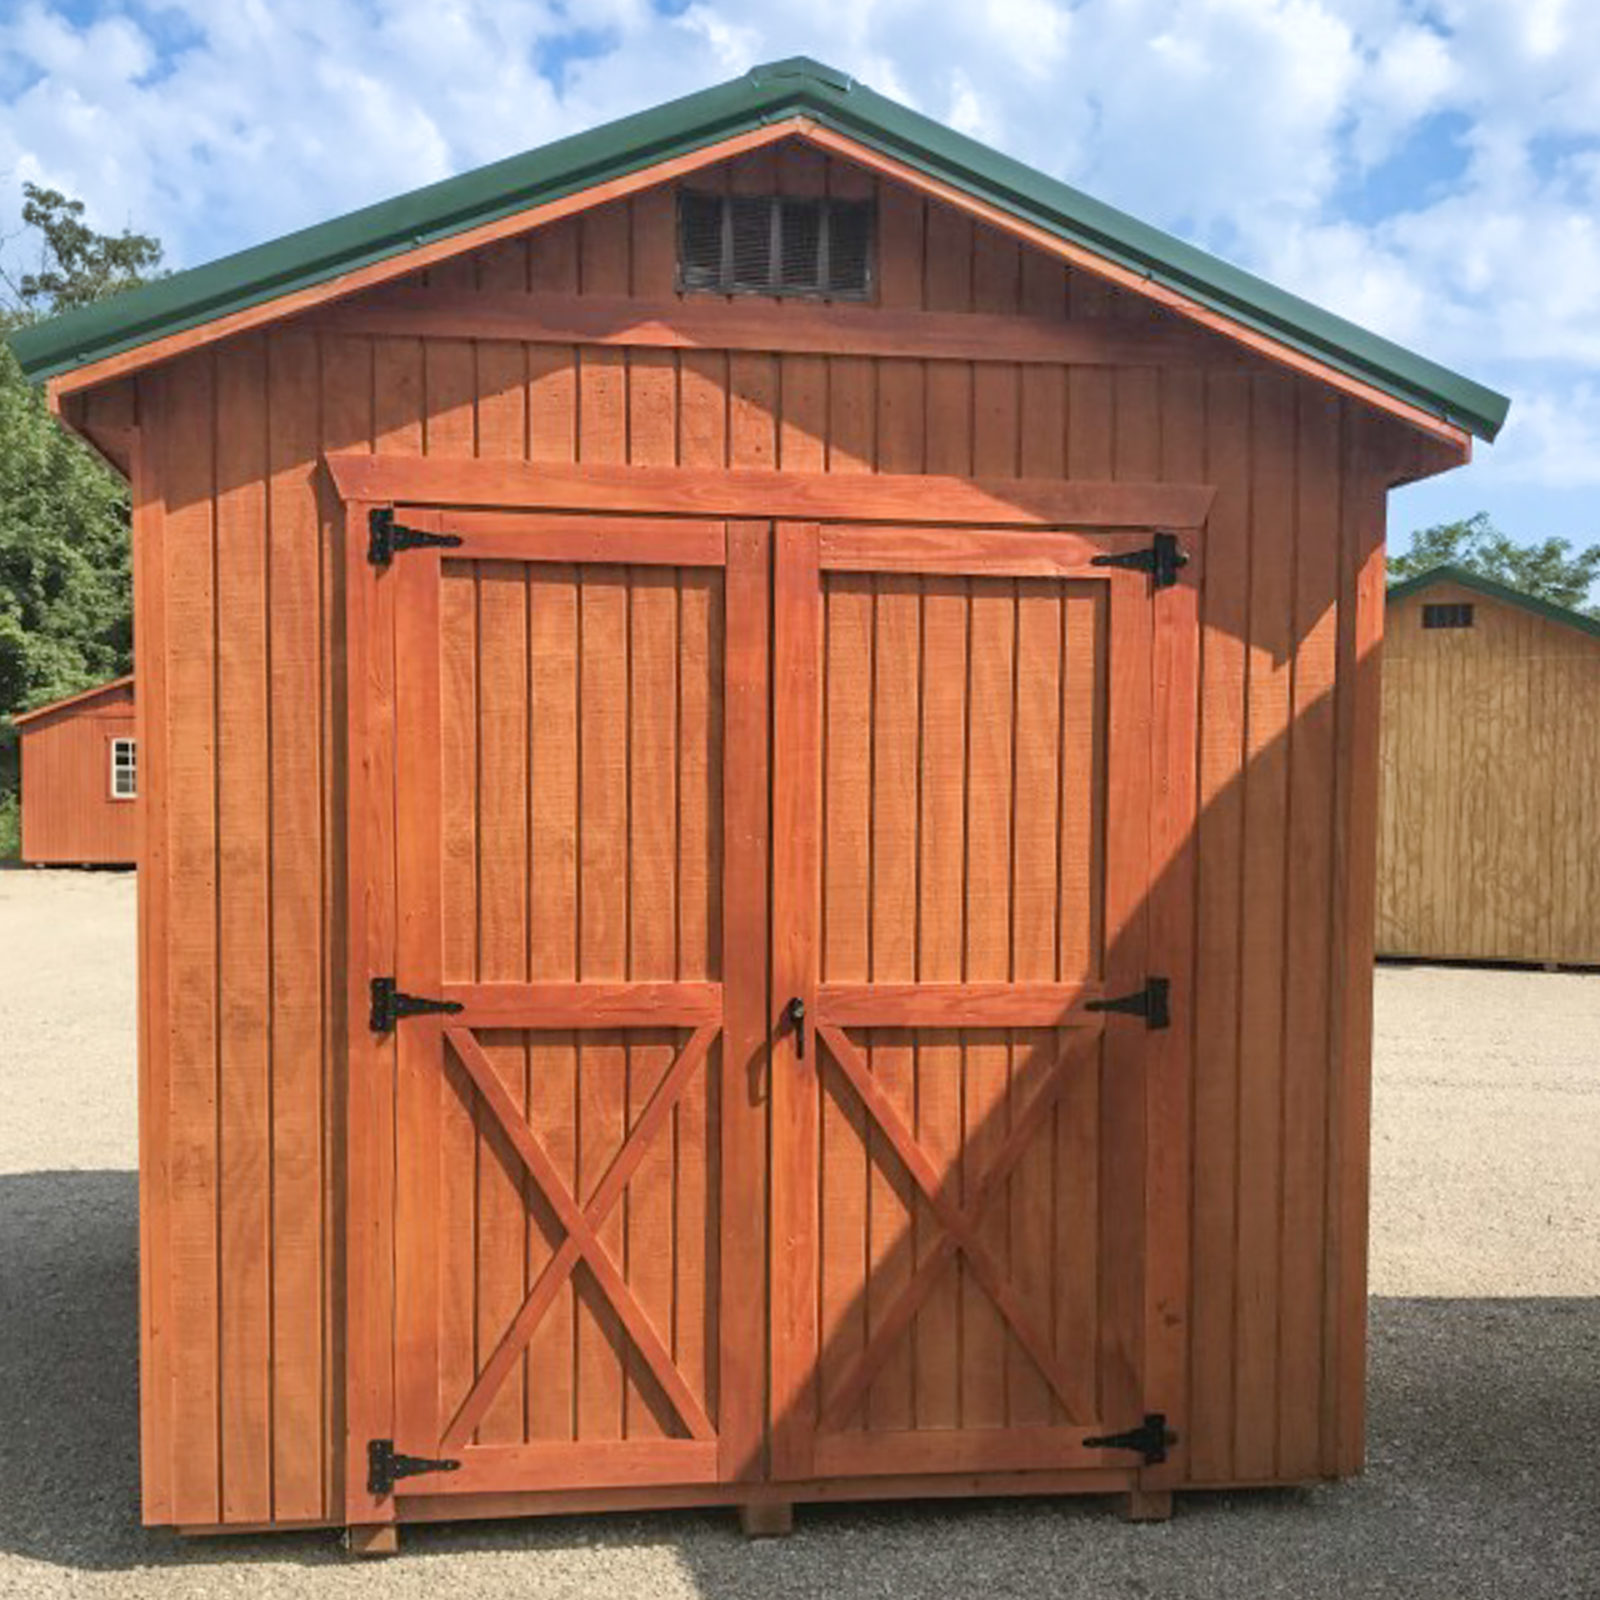 exterior of red small shed for lawnmower